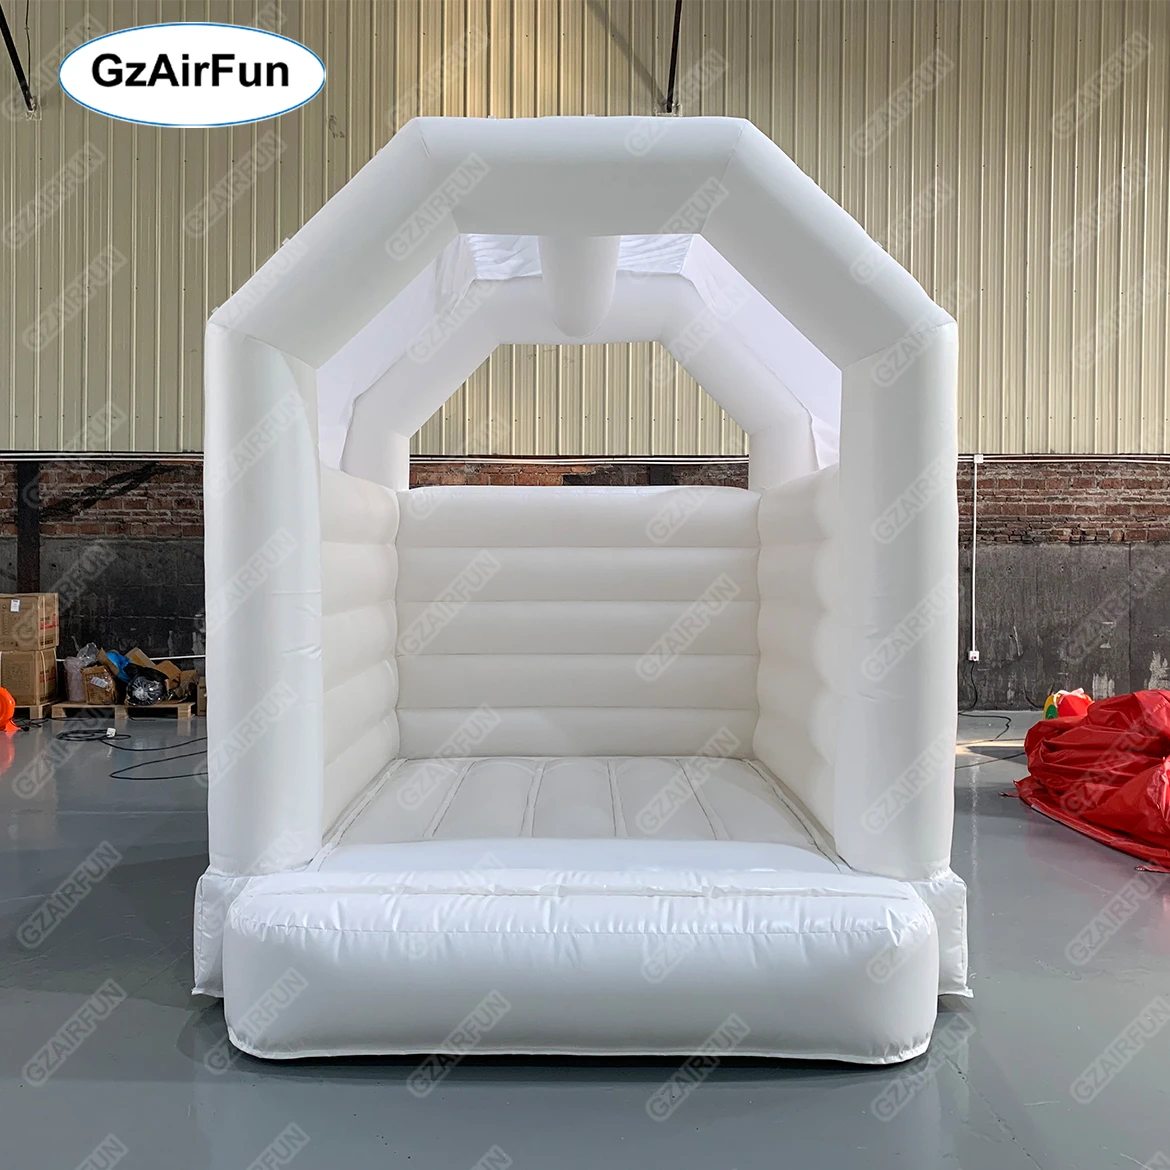 

Commercial Wedding Bounce House Kids Jumping Bouncy Castle Jumper White Inflatable Bounce House For Party